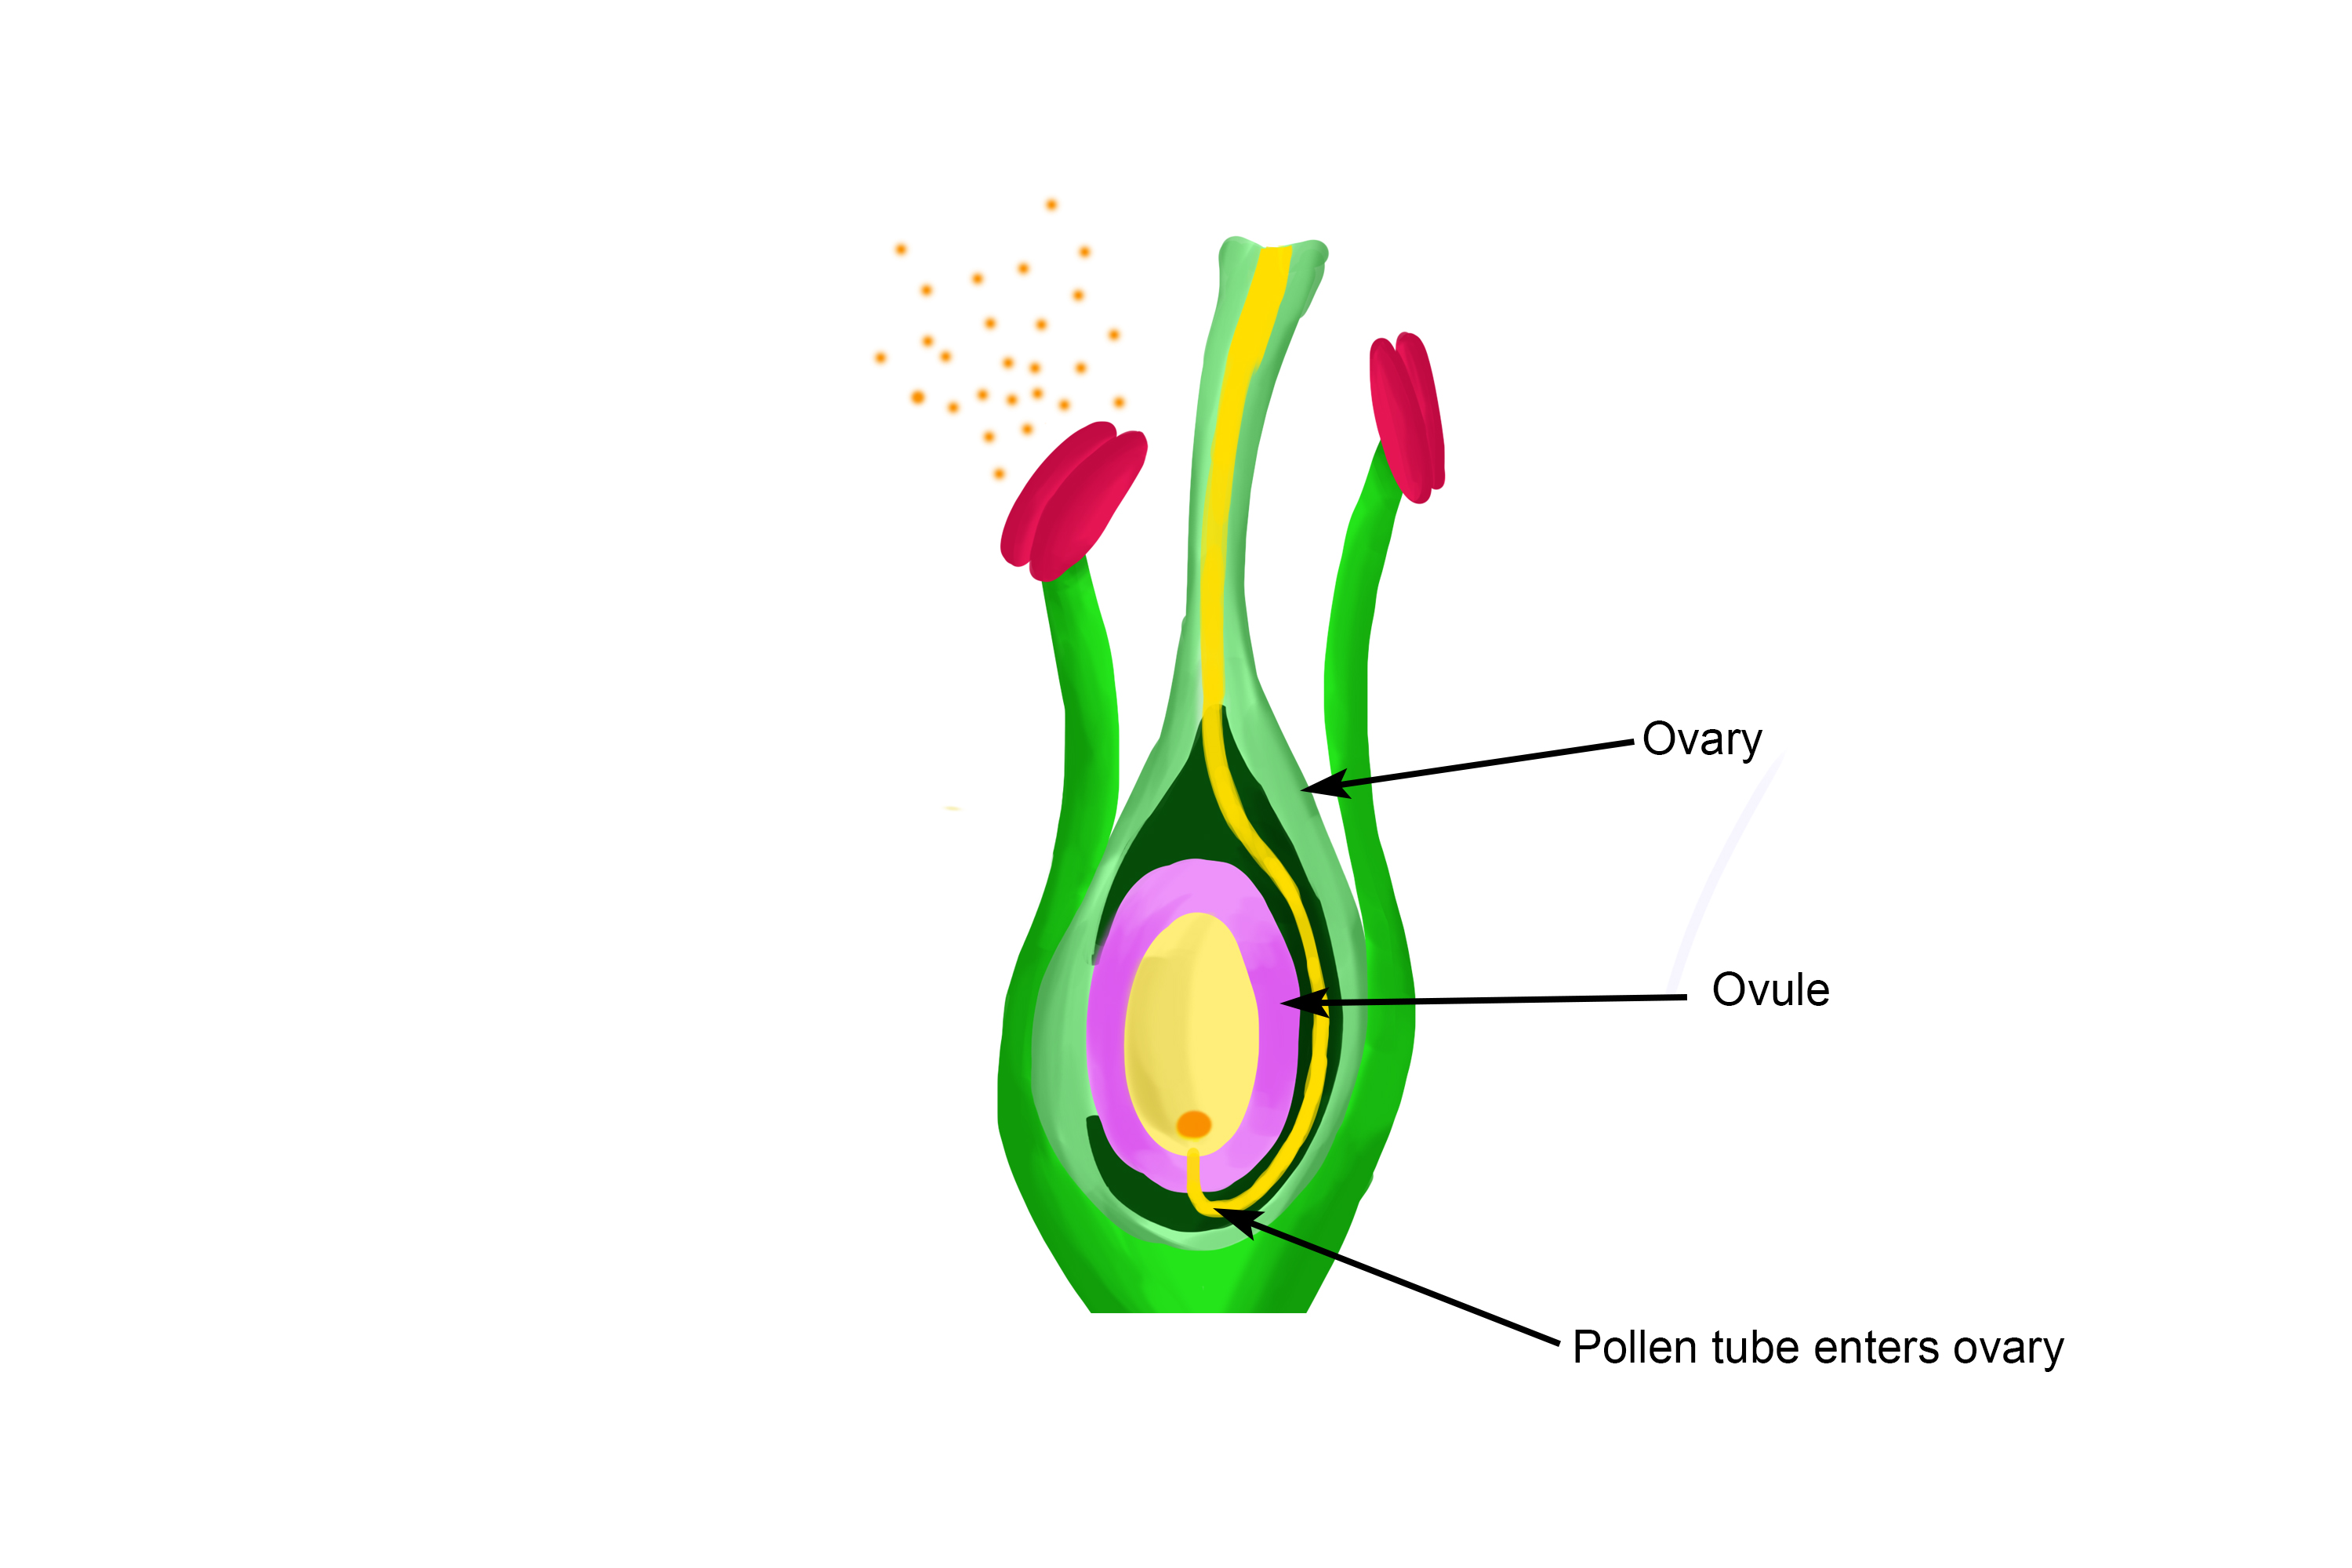 After the pollen tube enters into the ovary it then enters the ovule